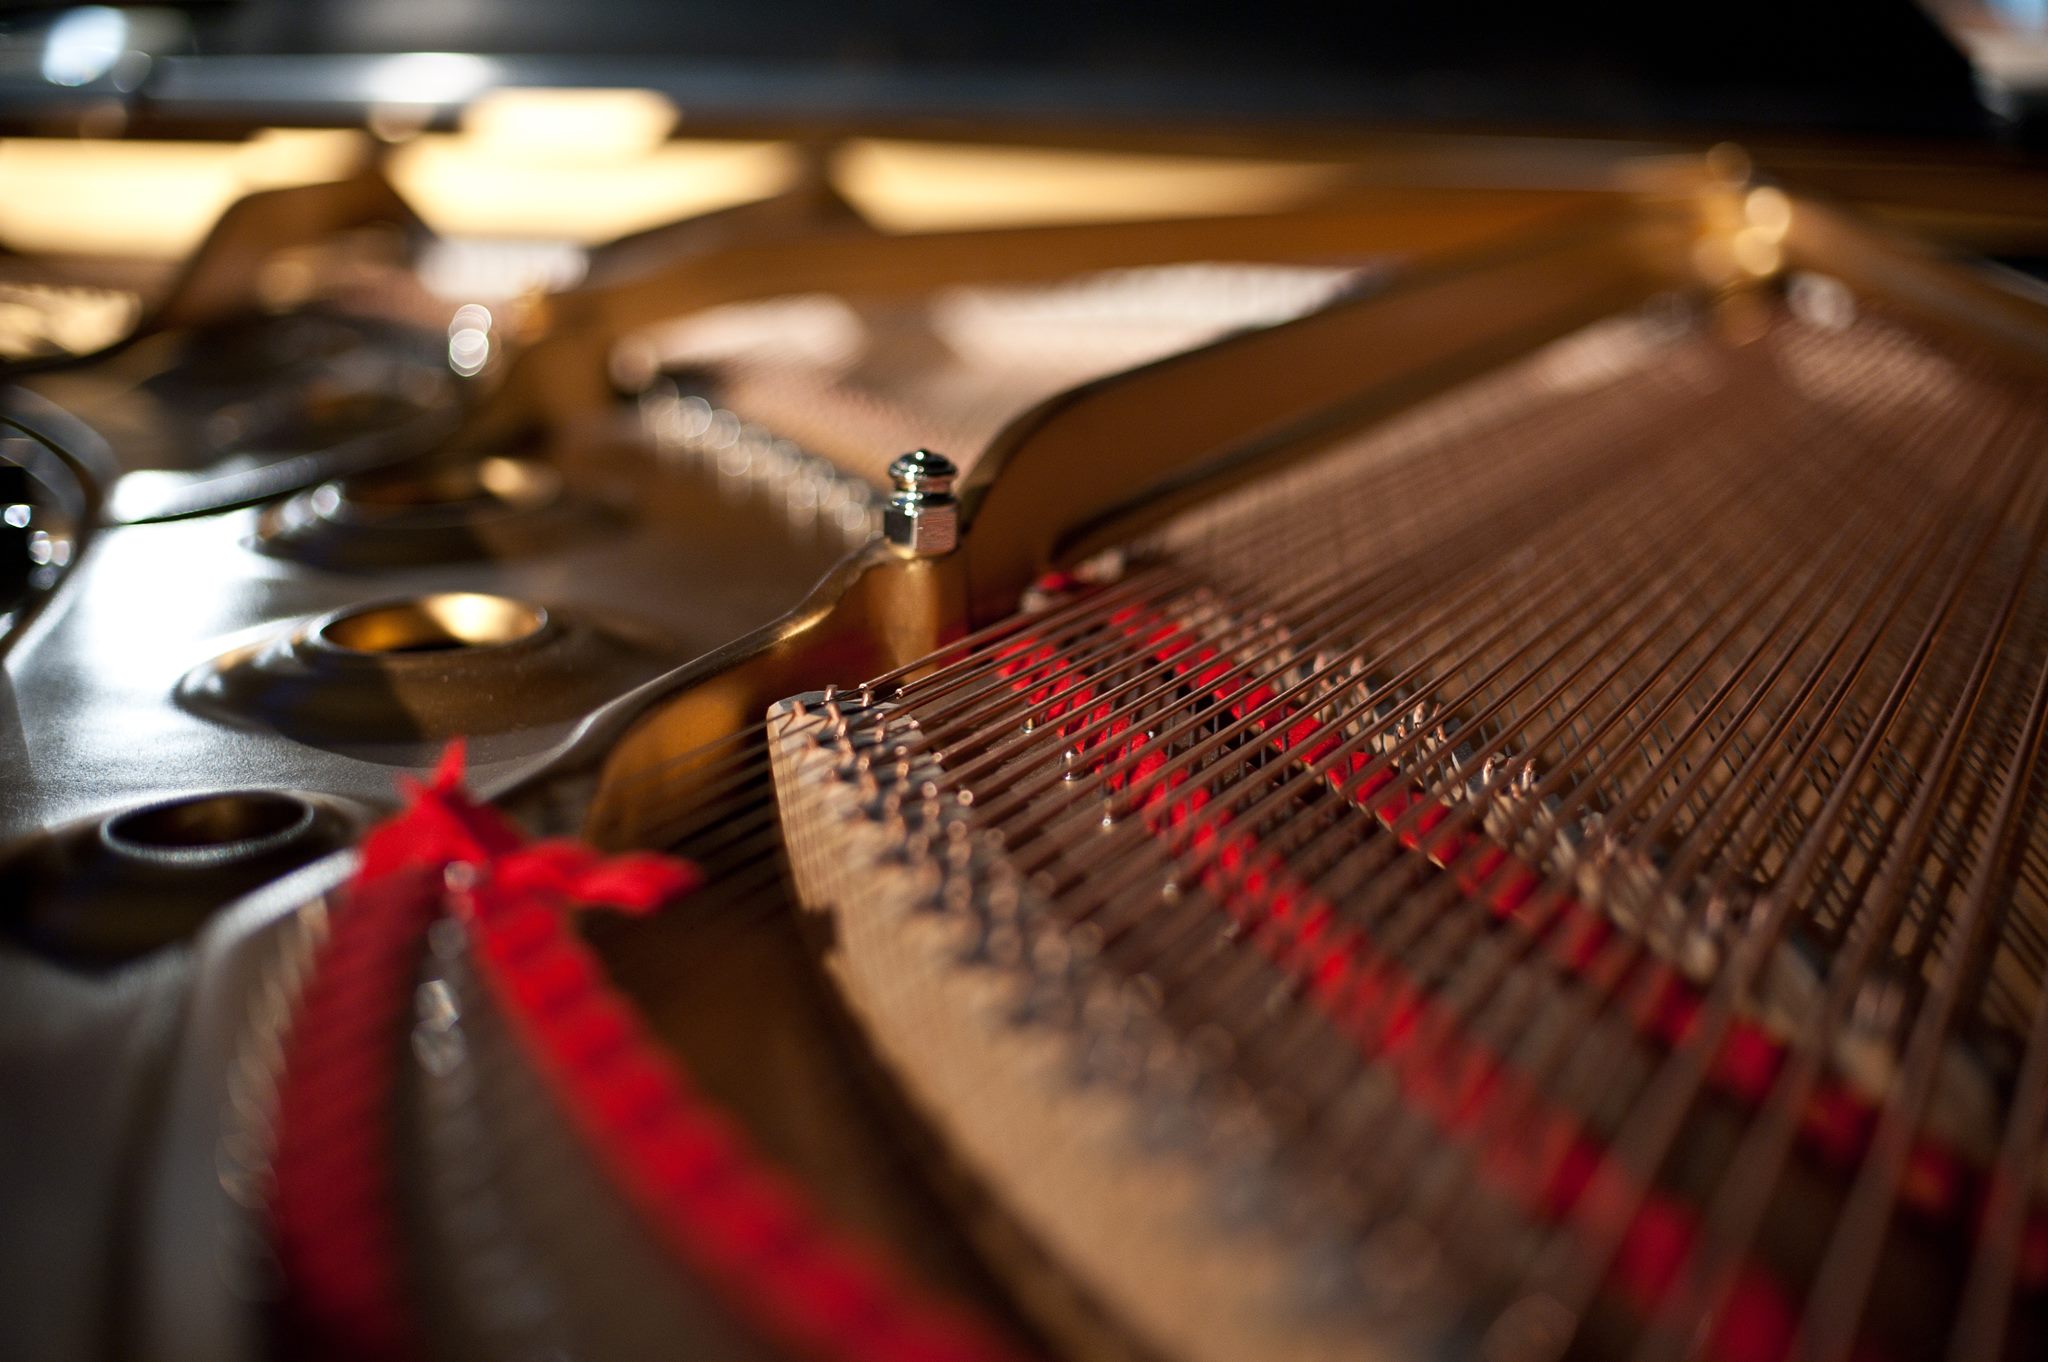 the inside part of the piano